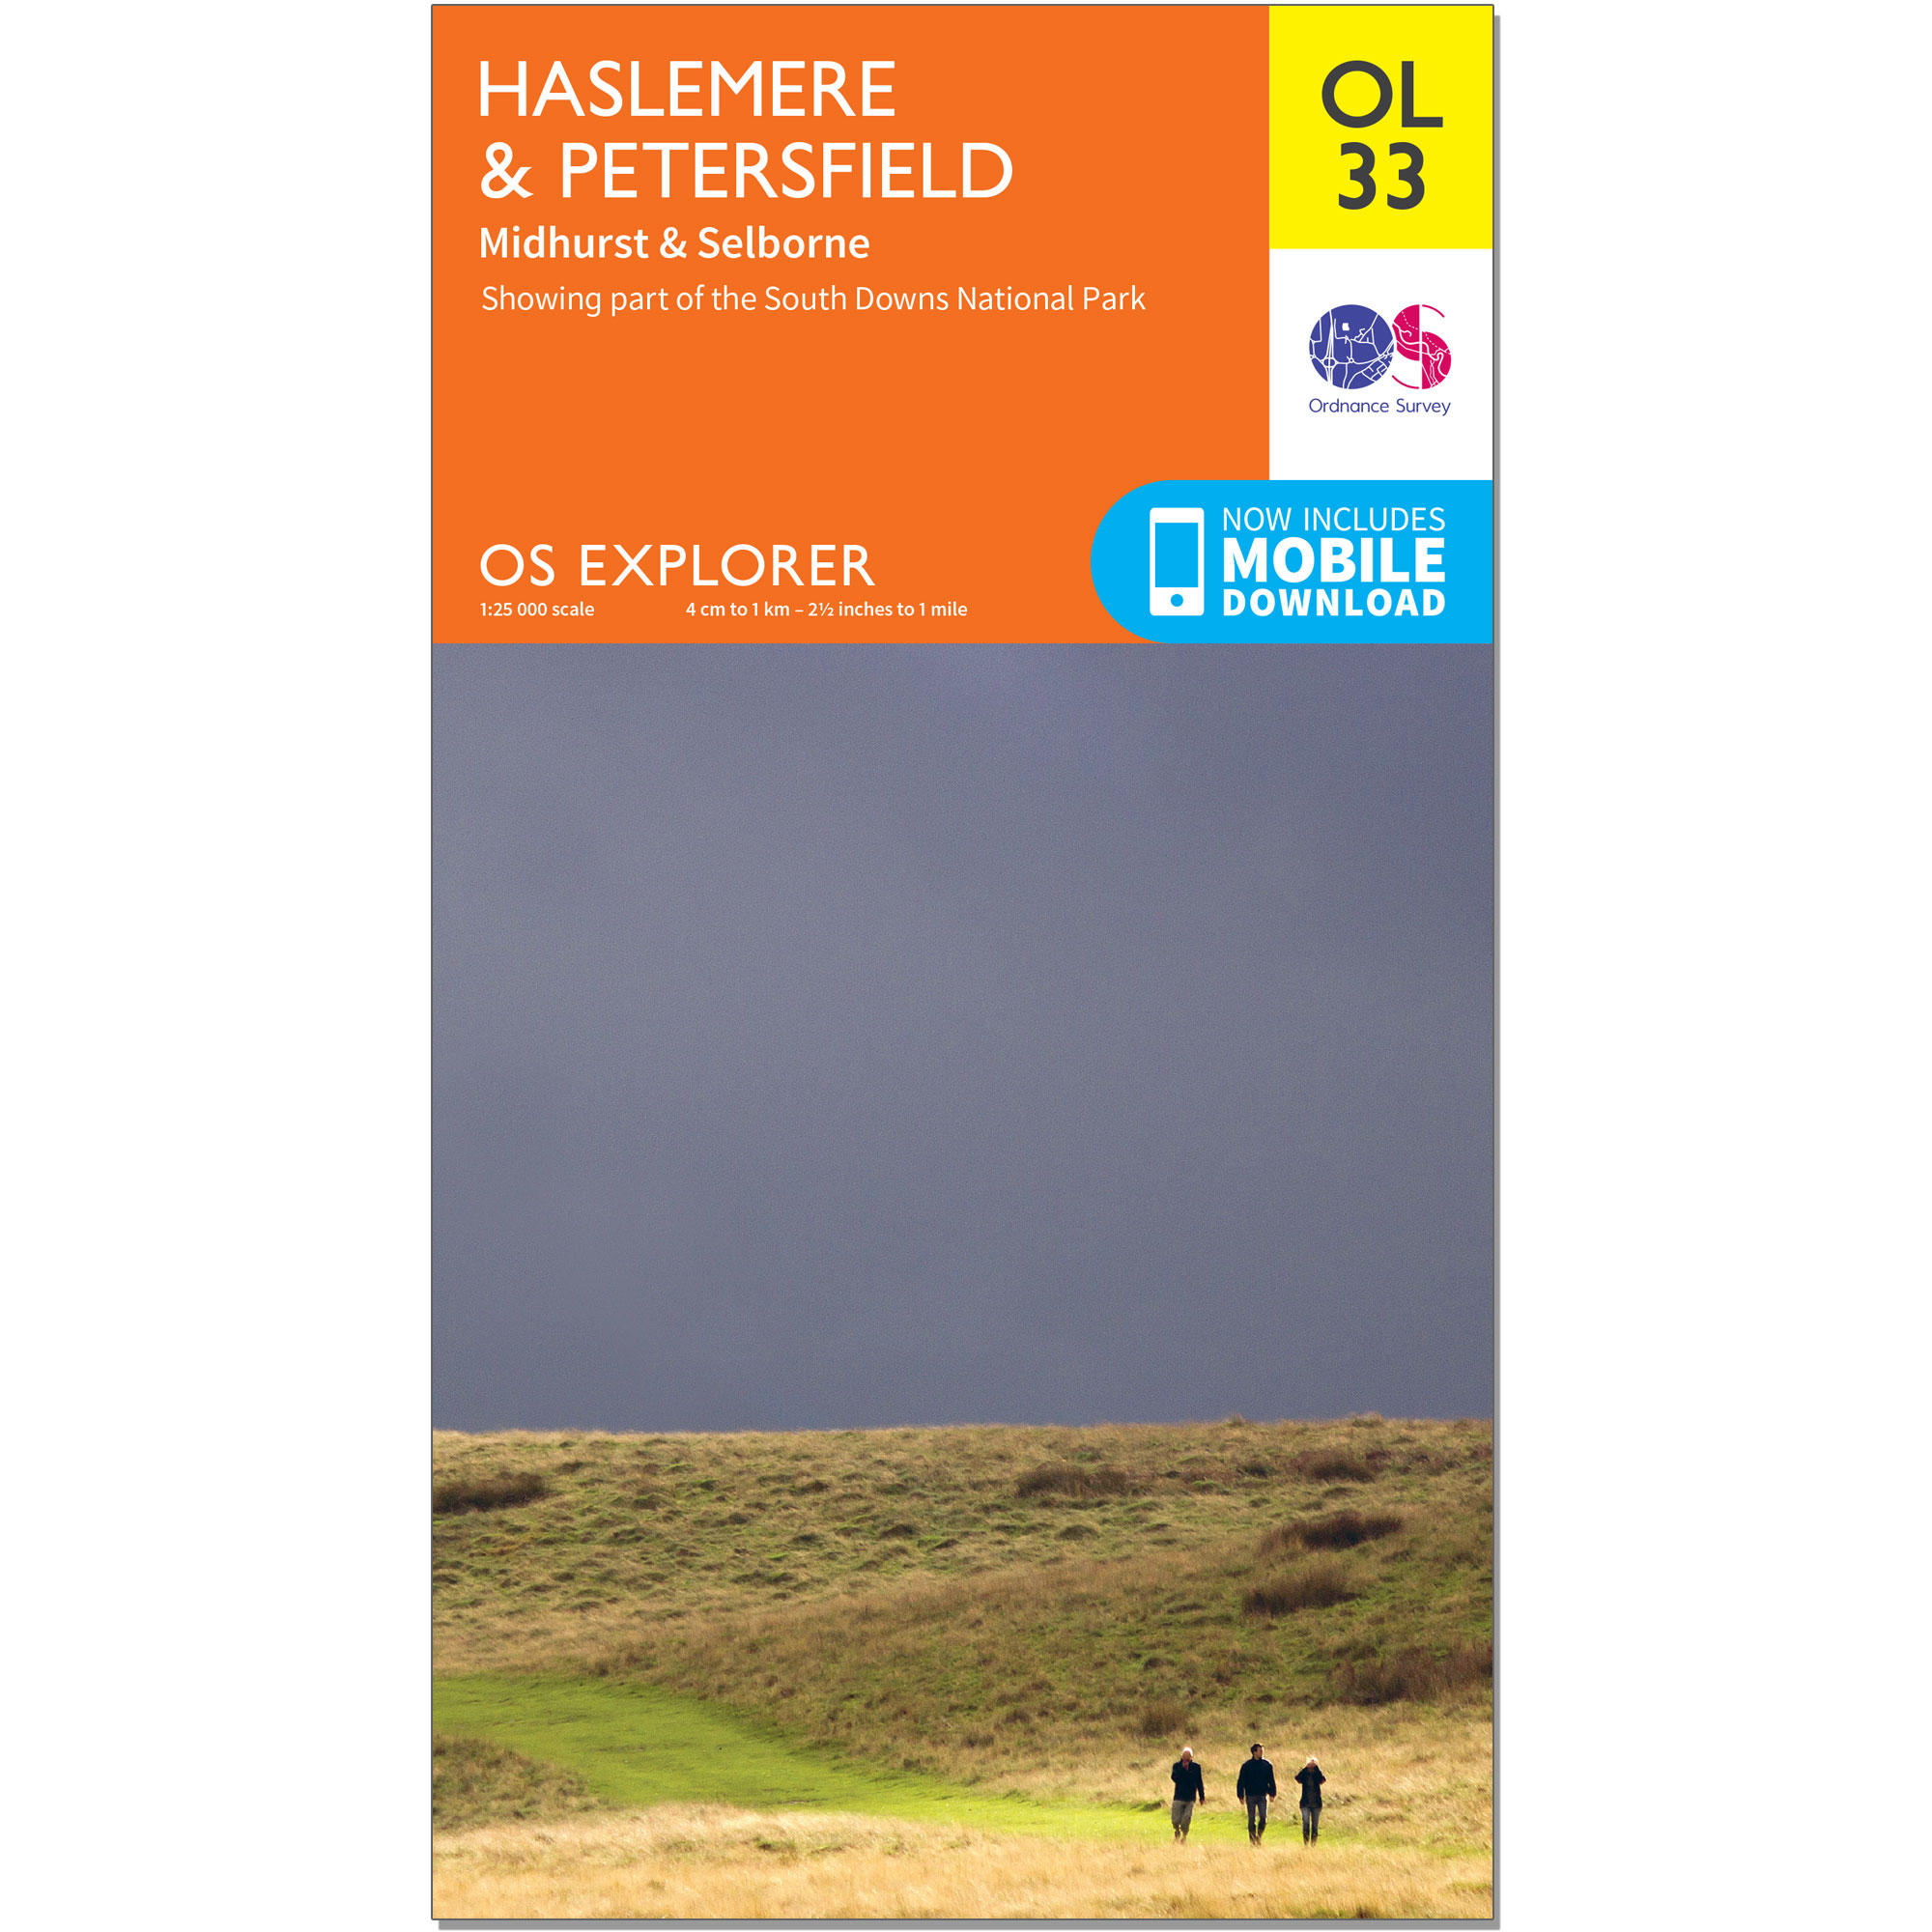 OS Explorer Leisure Map - Haslemere & Petersfield 1/2